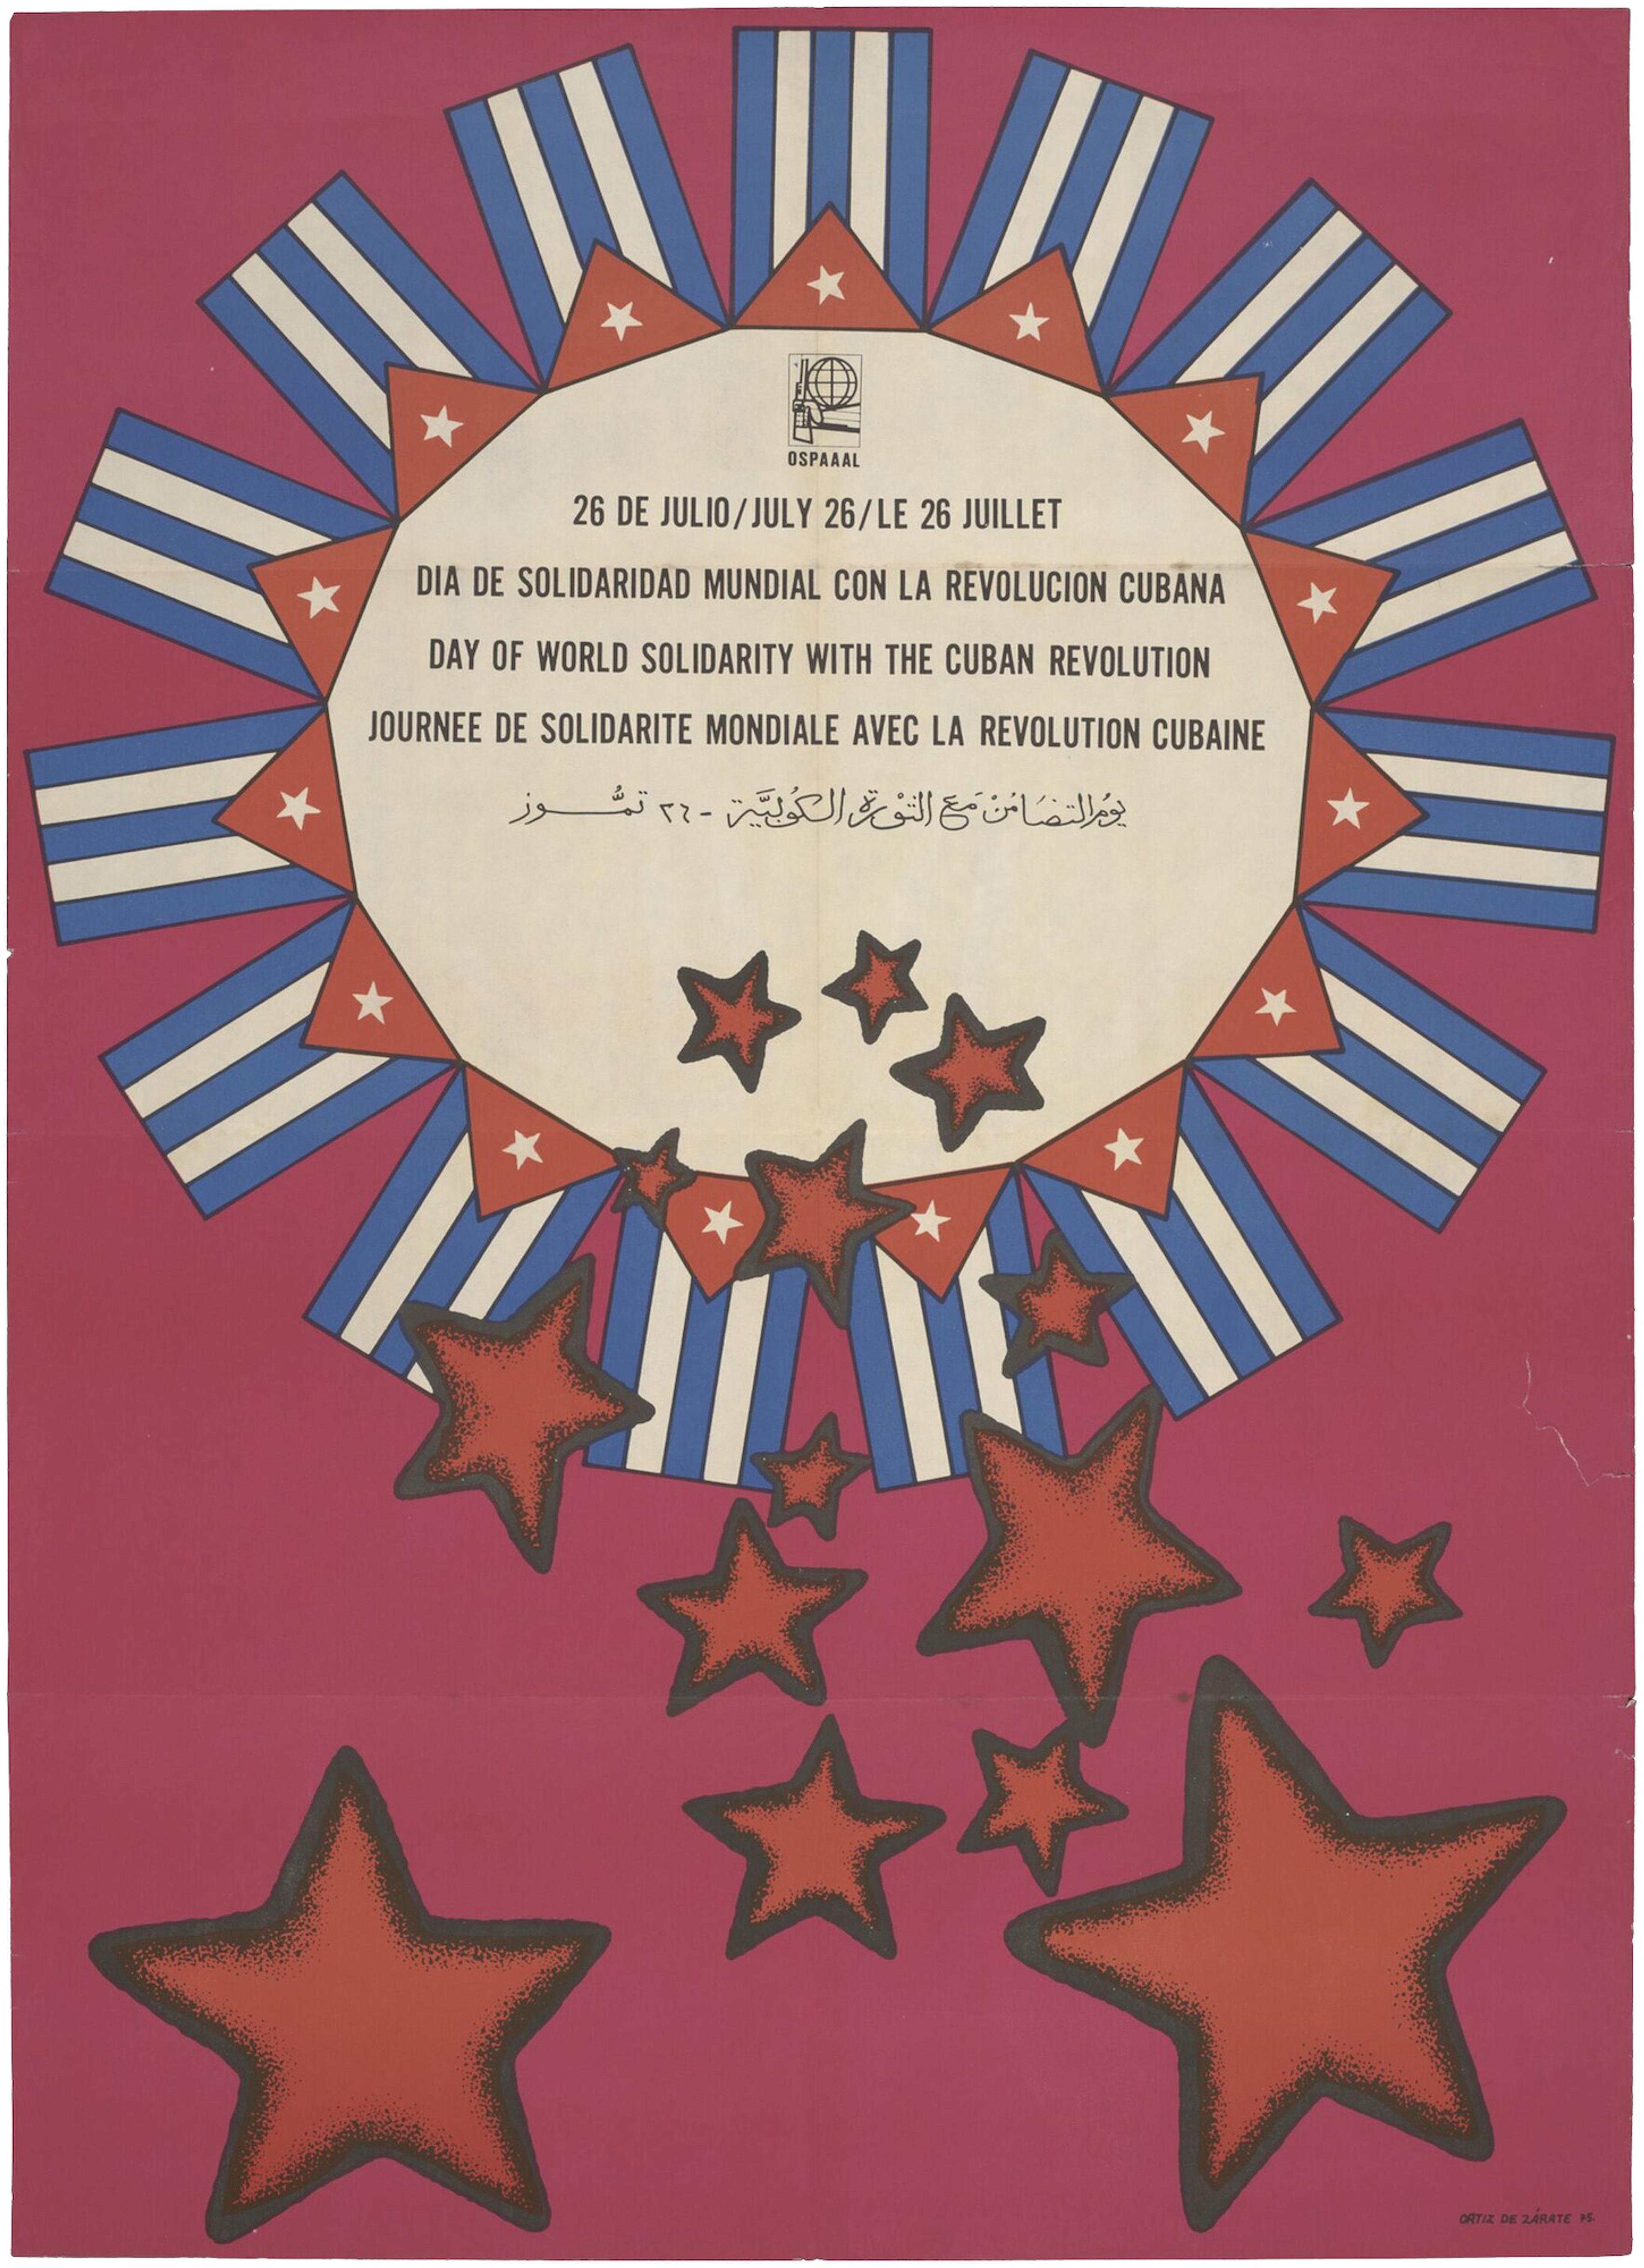 Colour offset lithograph poster on a pink ground. Repeated small cuban flags make a circle with text in centre, with red stars coming out increasing in size. Lettered in black in Spanish, Arabic, English and French, 'July 26 / Day of World Solidarity with the Cuban Revolution'